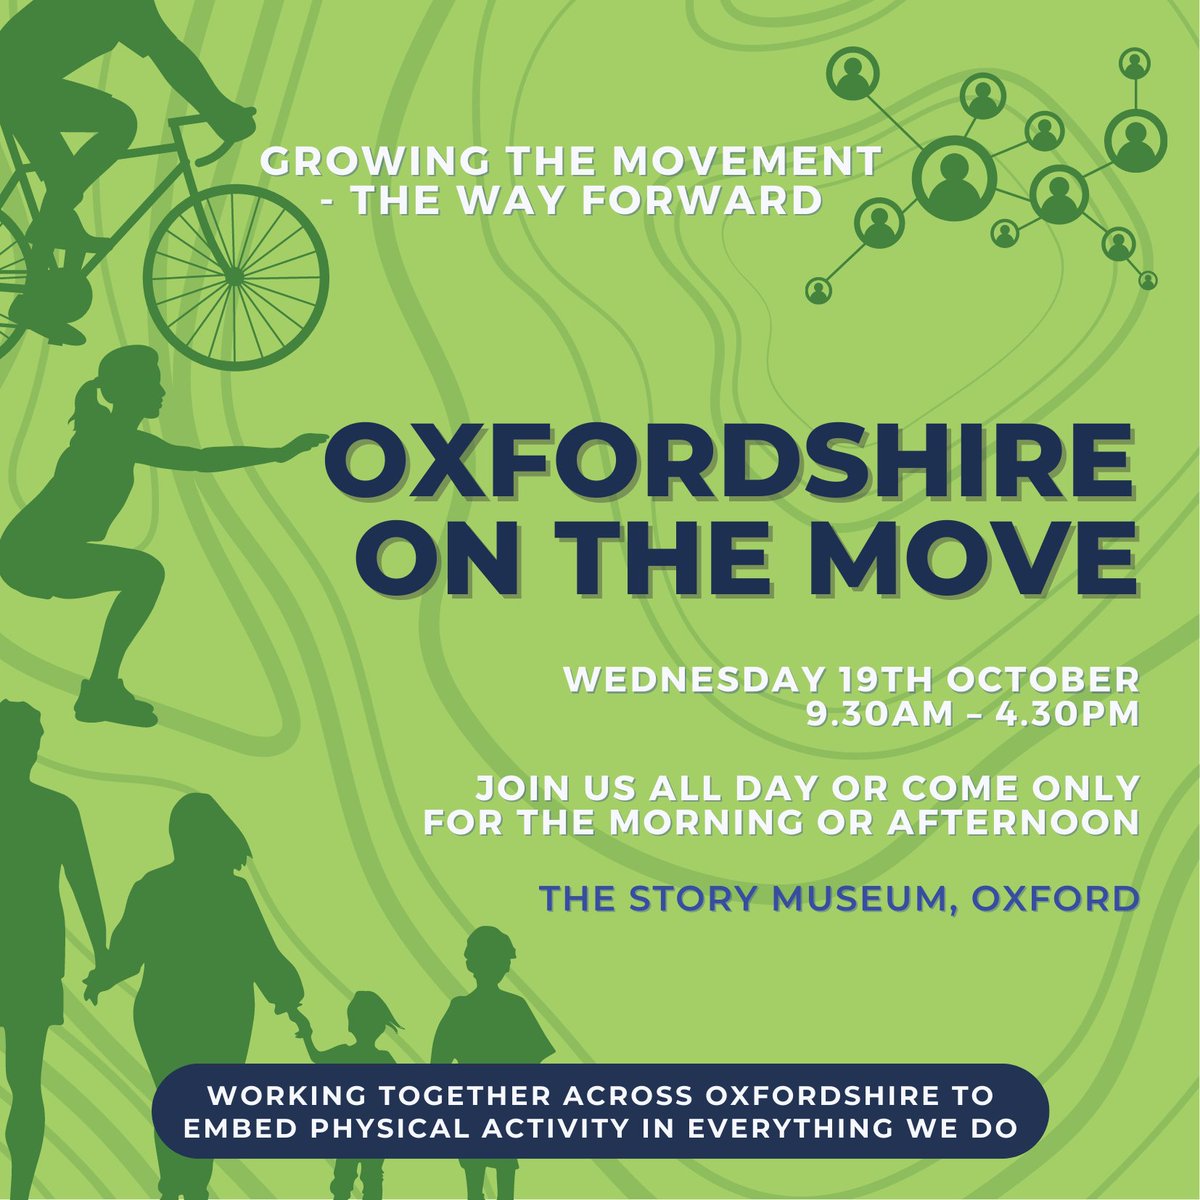 Over the last few months, we’ve consulted over 7️⃣0️⃣ organisations & 1️⃣2️⃣0️⃣ individuals to develop a Collective Framework for physical activity, underpinned by four ambitions to tackle together.
Read more about Oxfordshire on the Move and how to sign up 👉https://t.co/vhC7nwnwlN